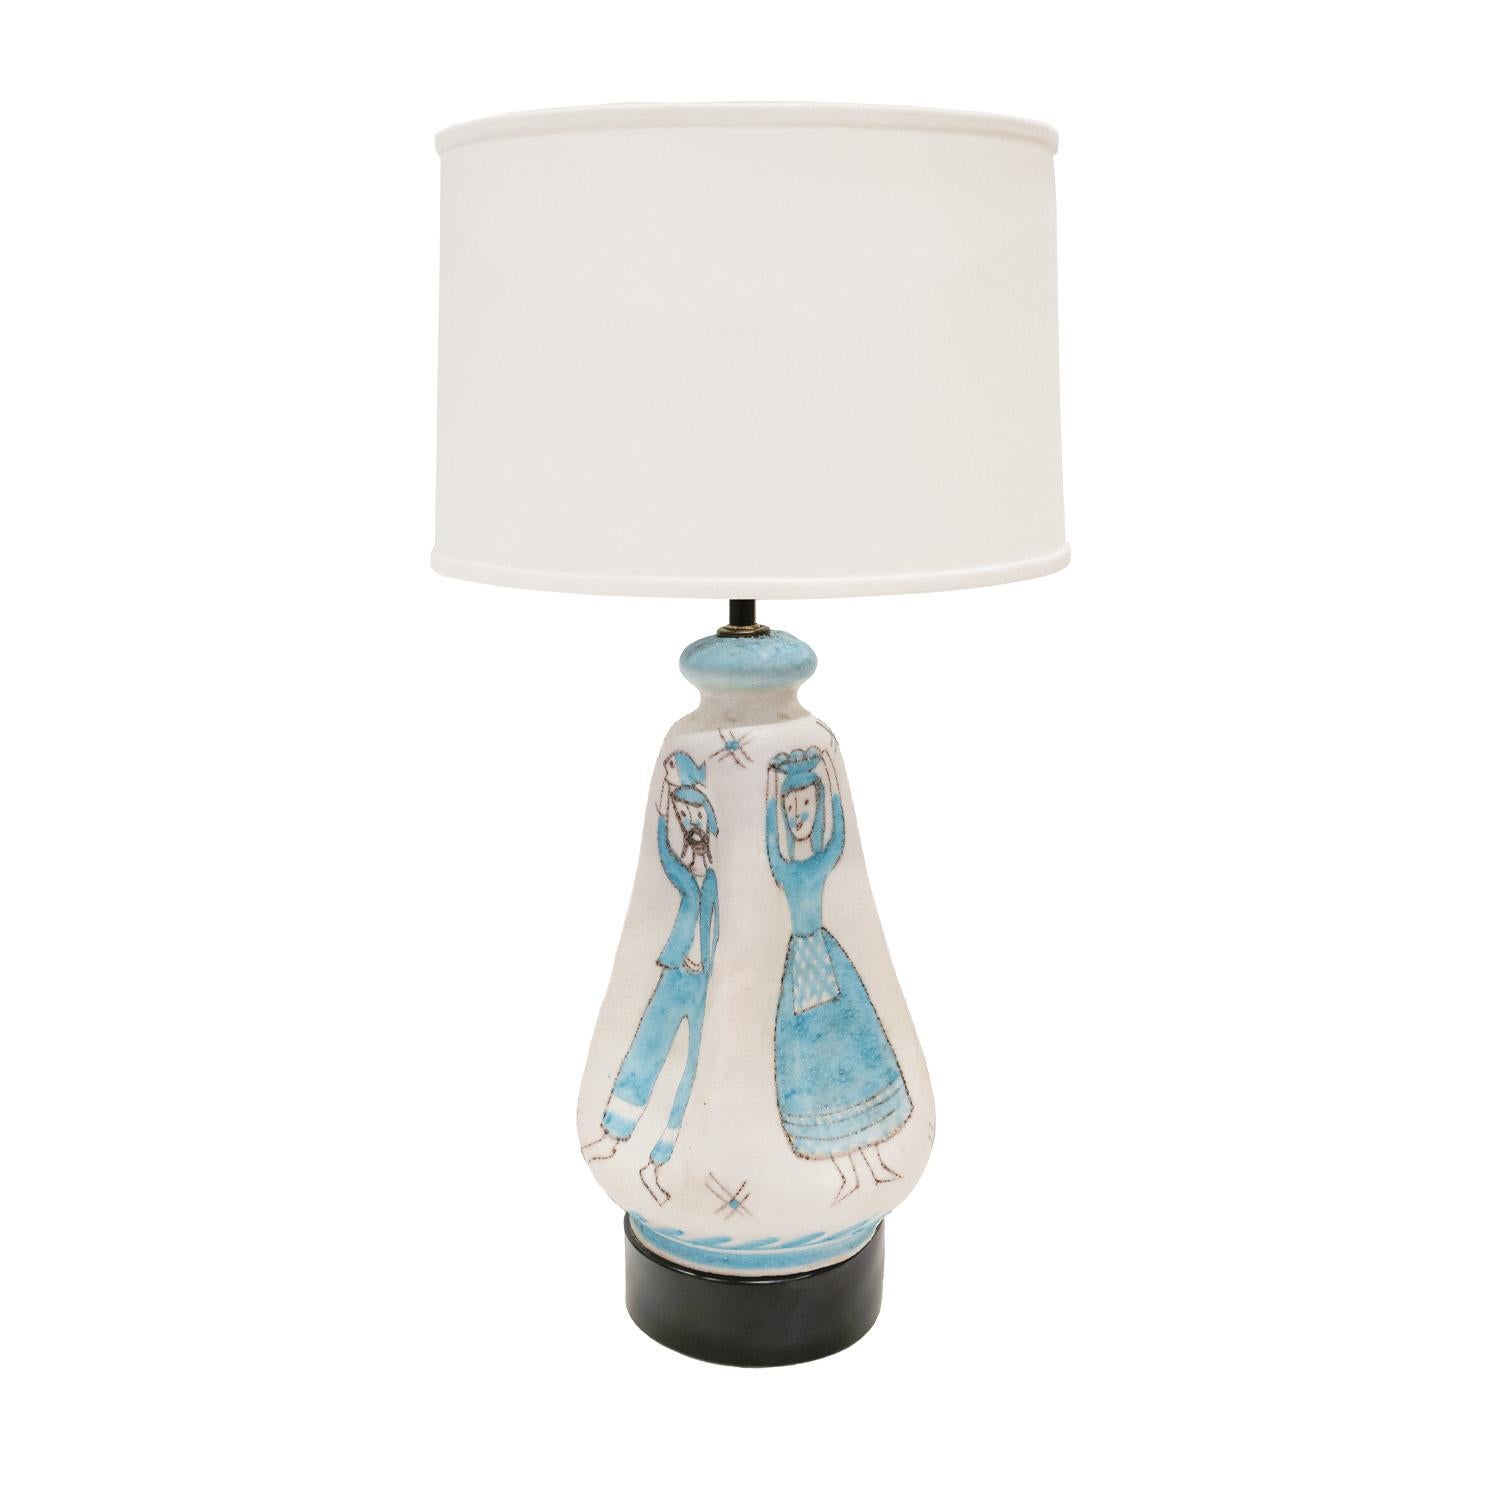 Hand-thrown ceramic table lamp, each side concave with pastoral figural motif, in light blue, brown and white salt glaze by C.A.S. Vietri, Italy 1950's. This lamp is absolutely stunning.  The best of Italian ceramics from the 1950’s.  The base of